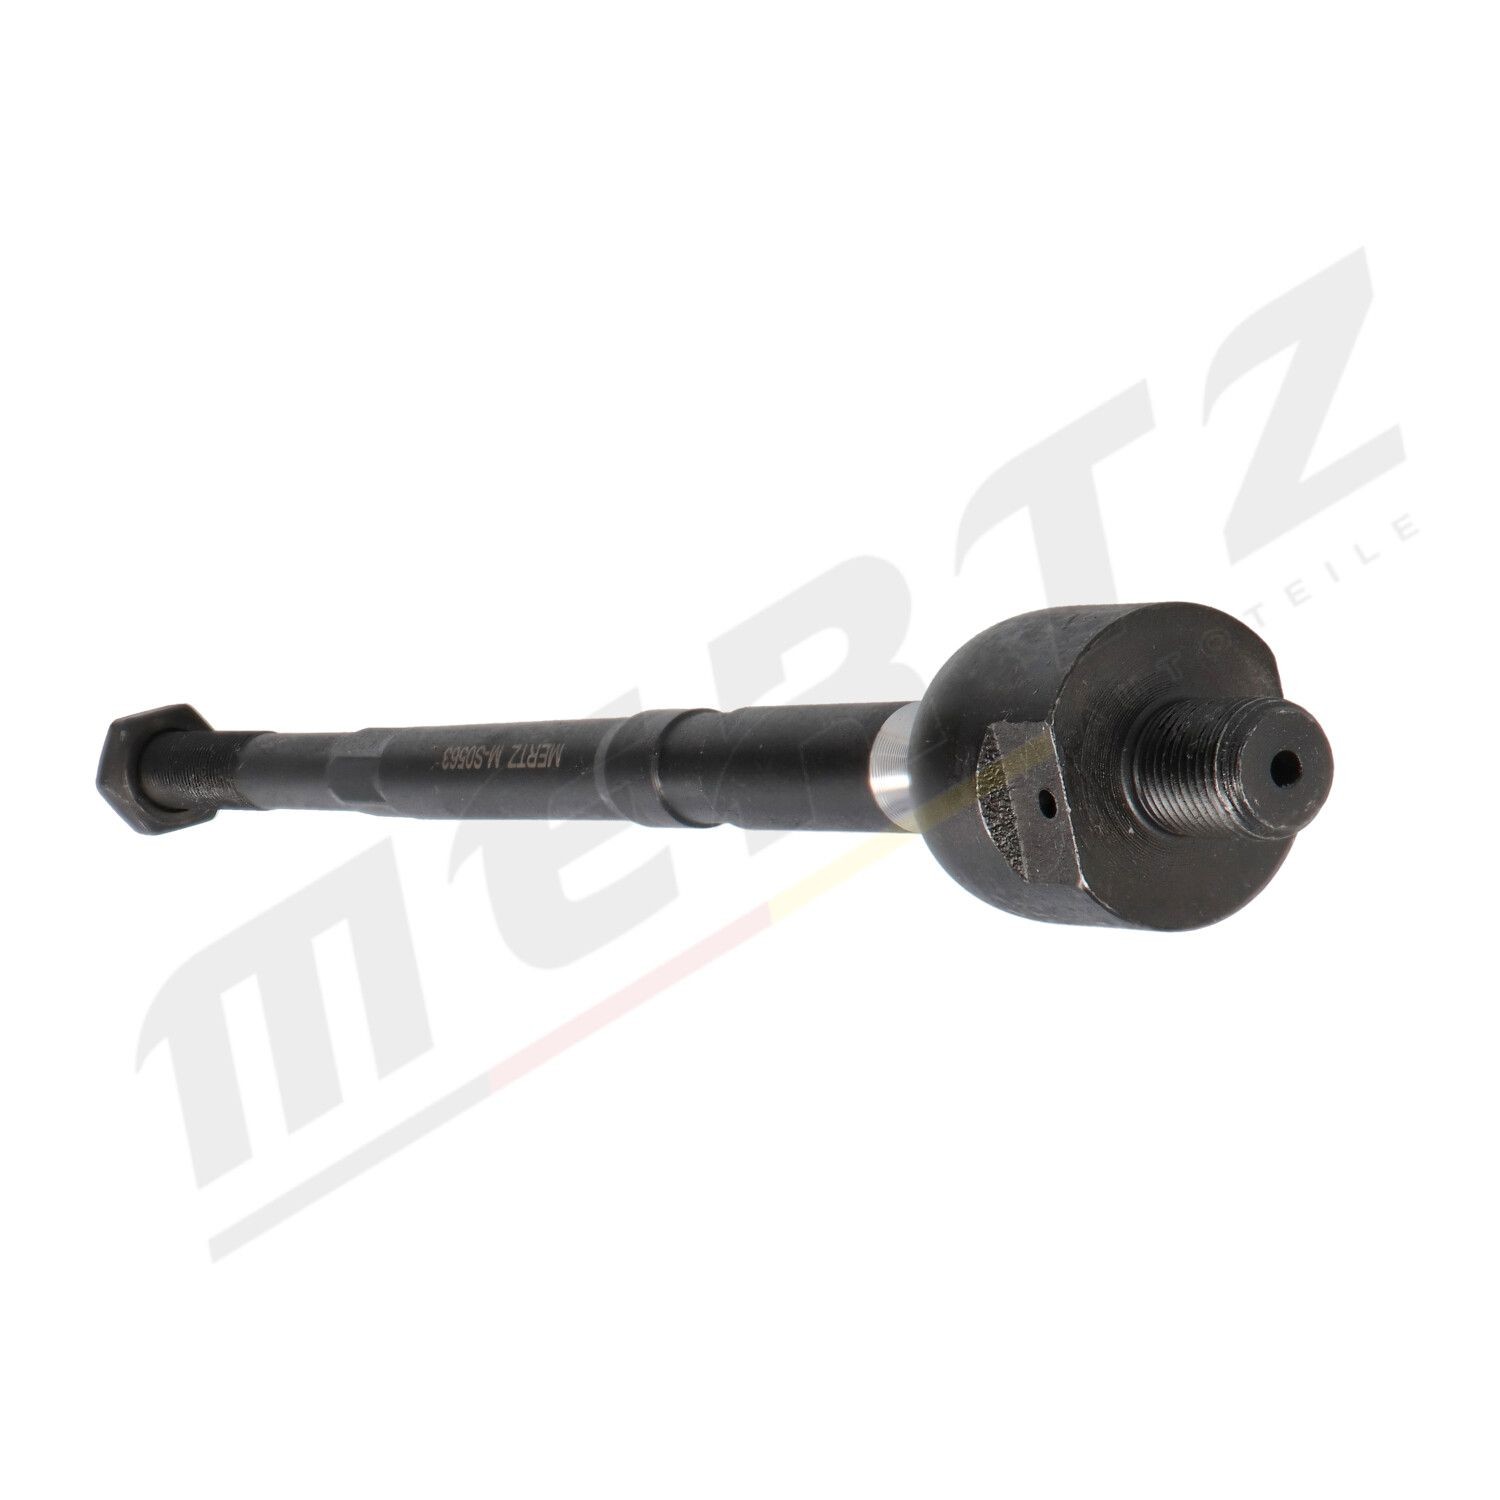 MS0563 Rack end MERTZ M-S0563 review and test